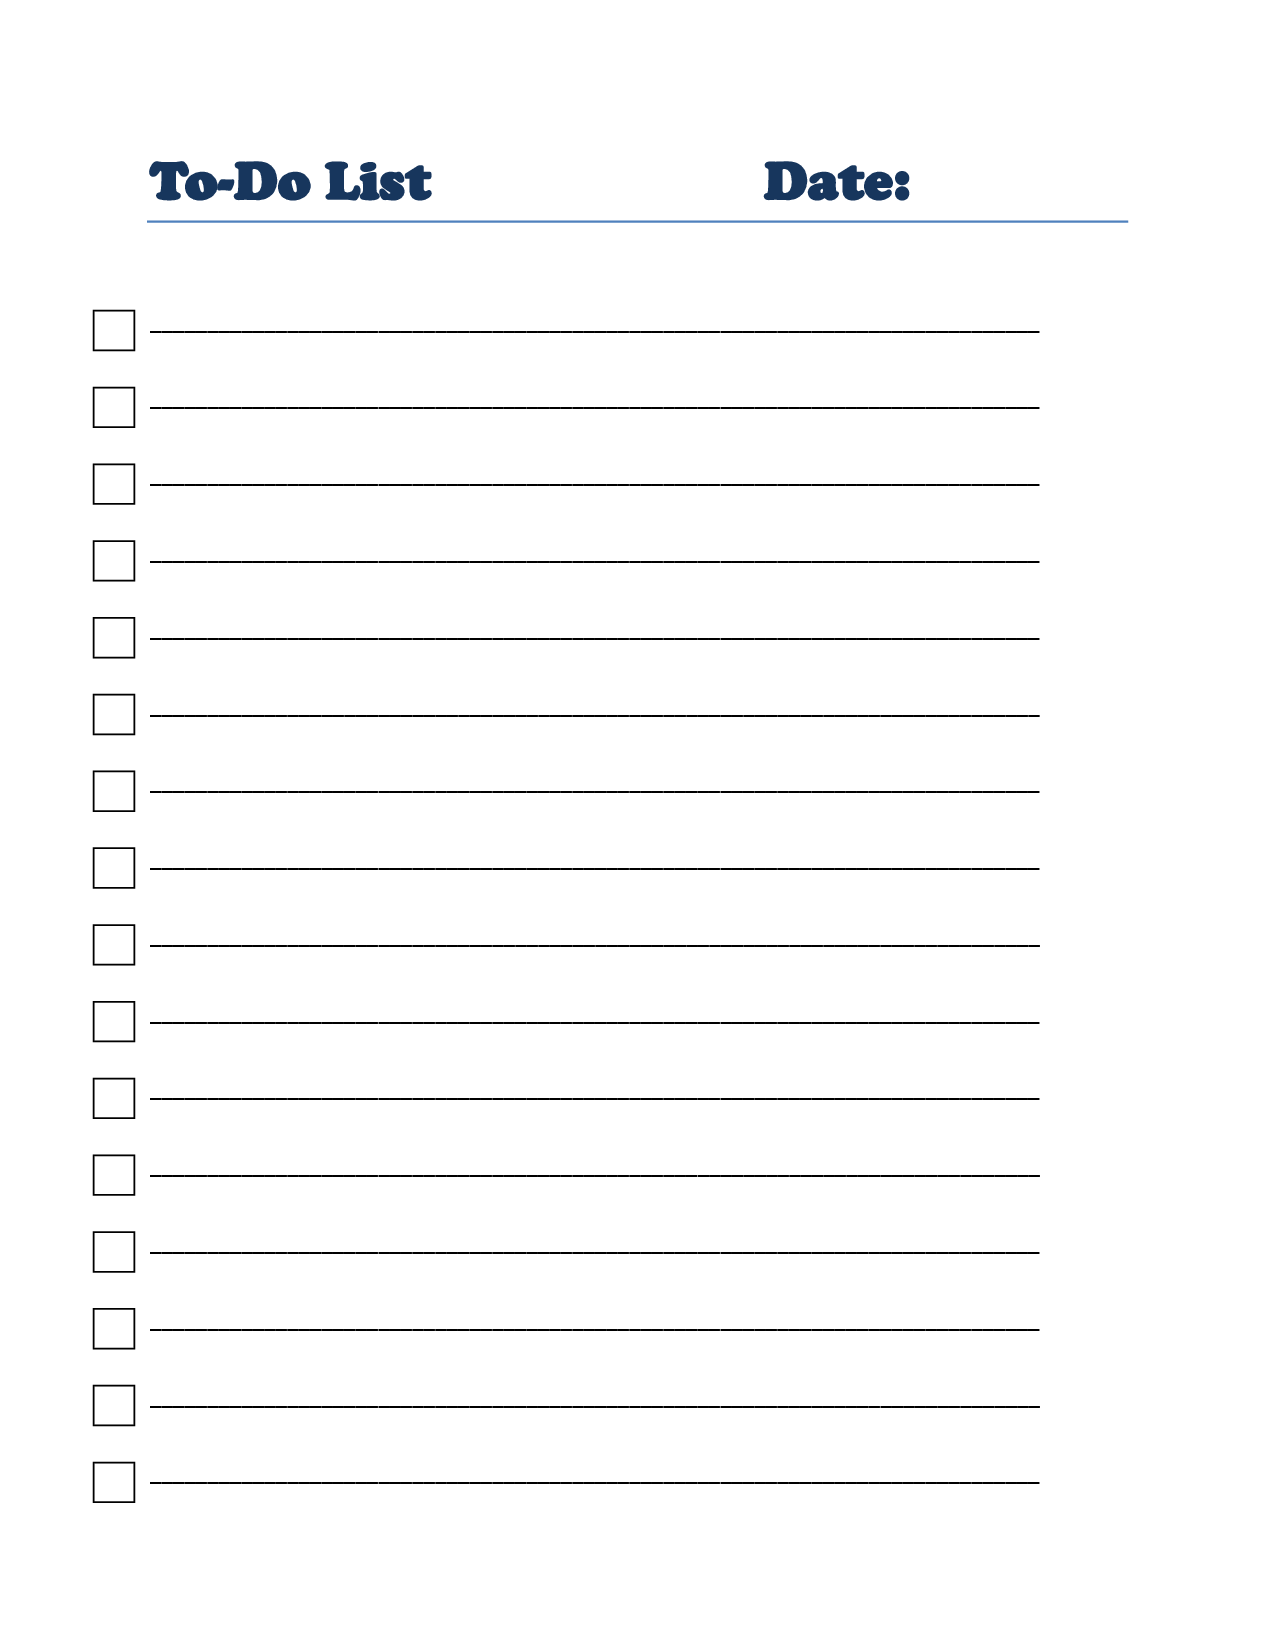 free-printable-to-do-checklist-template-paper-trail-design